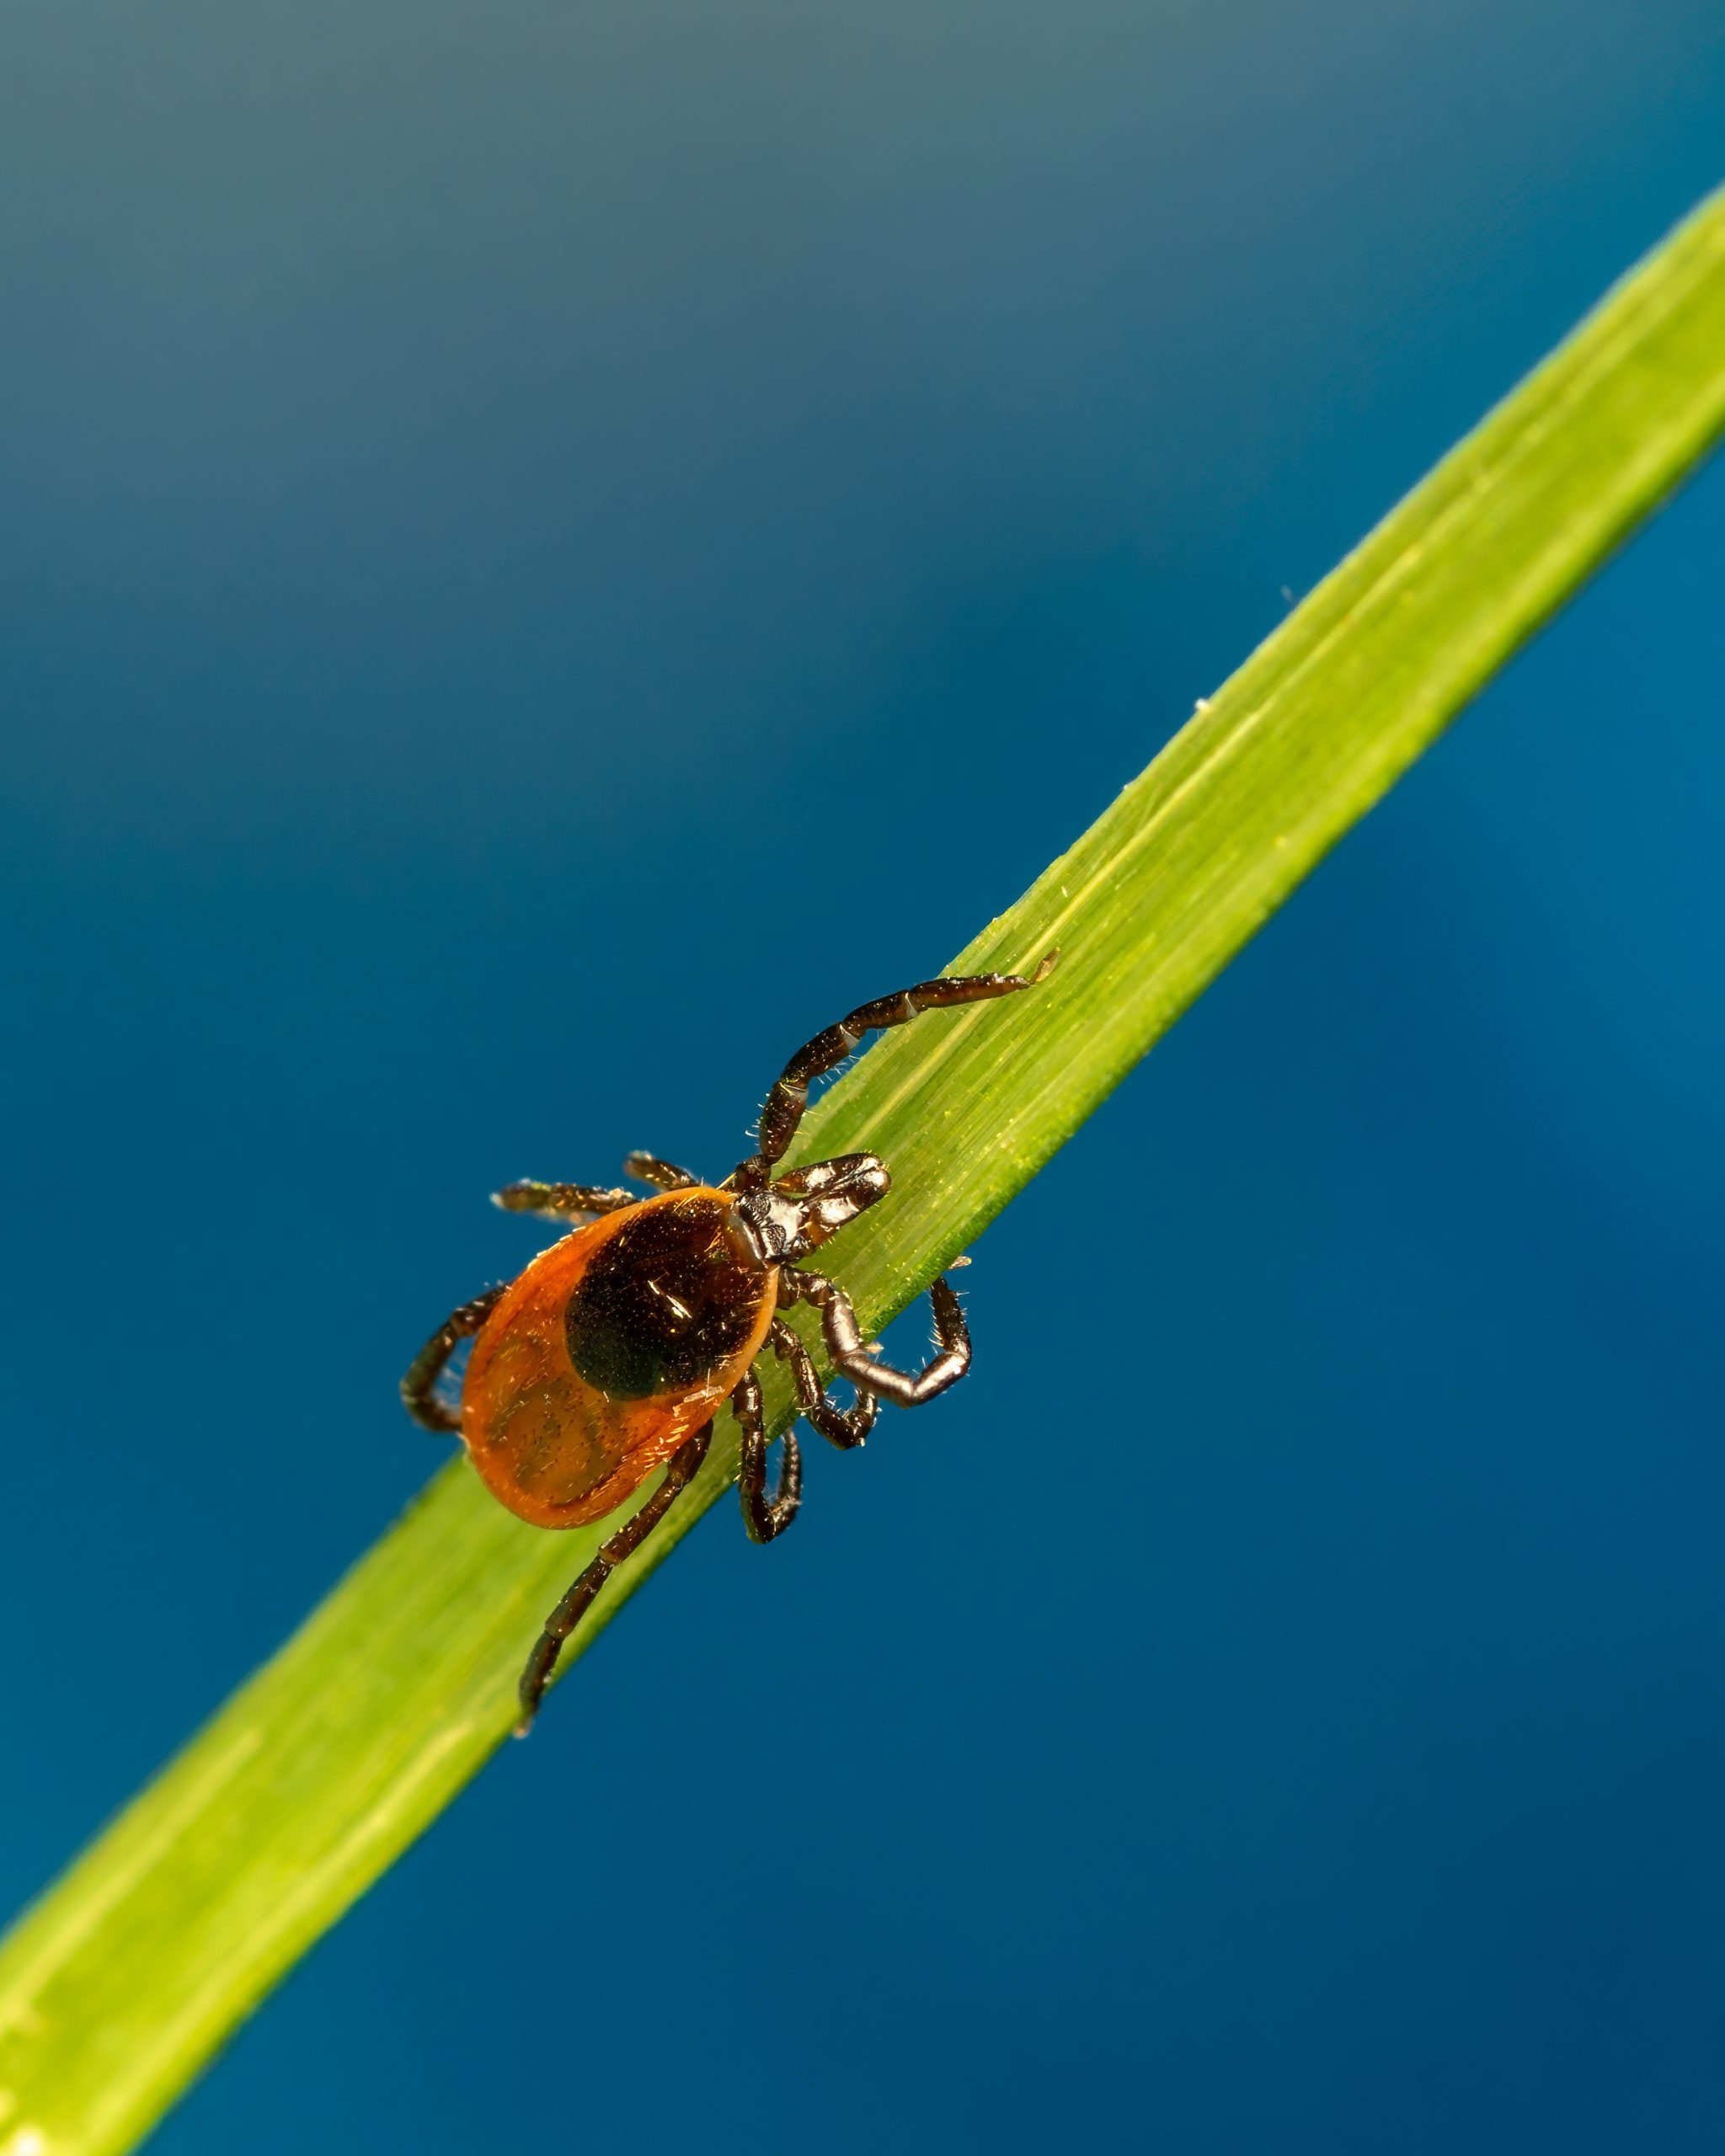 Close-up of a tick, a brown insect with an oval-shaped body, eight legs, and pincers, on grass stalk